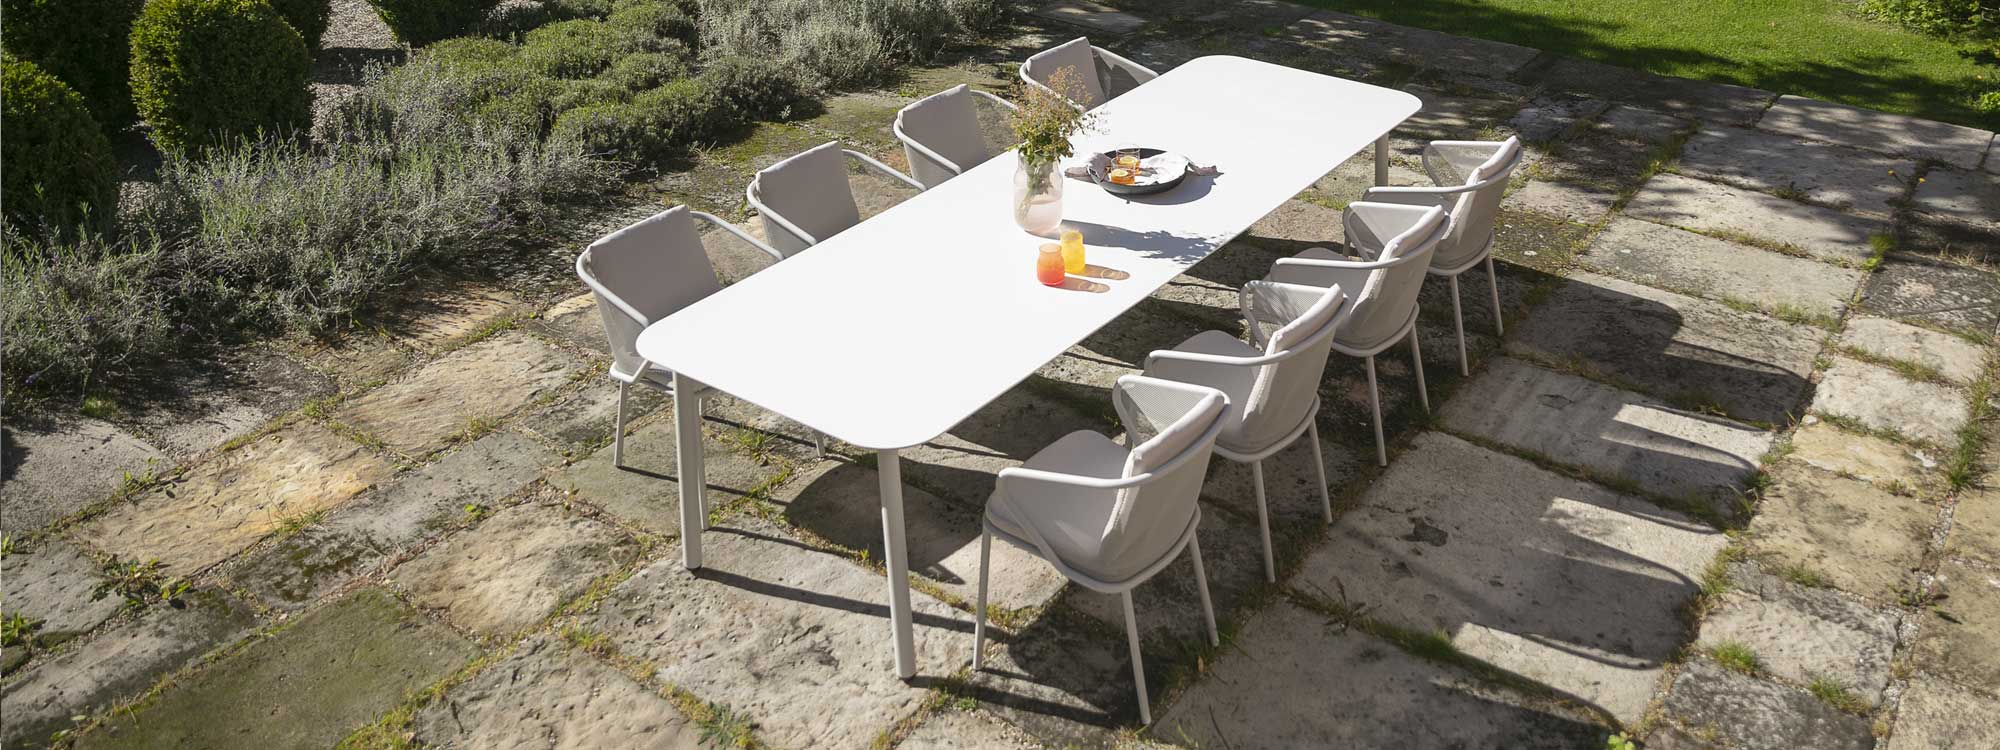 Image of birdseye view of Condor white garden dining set on rustic terrace